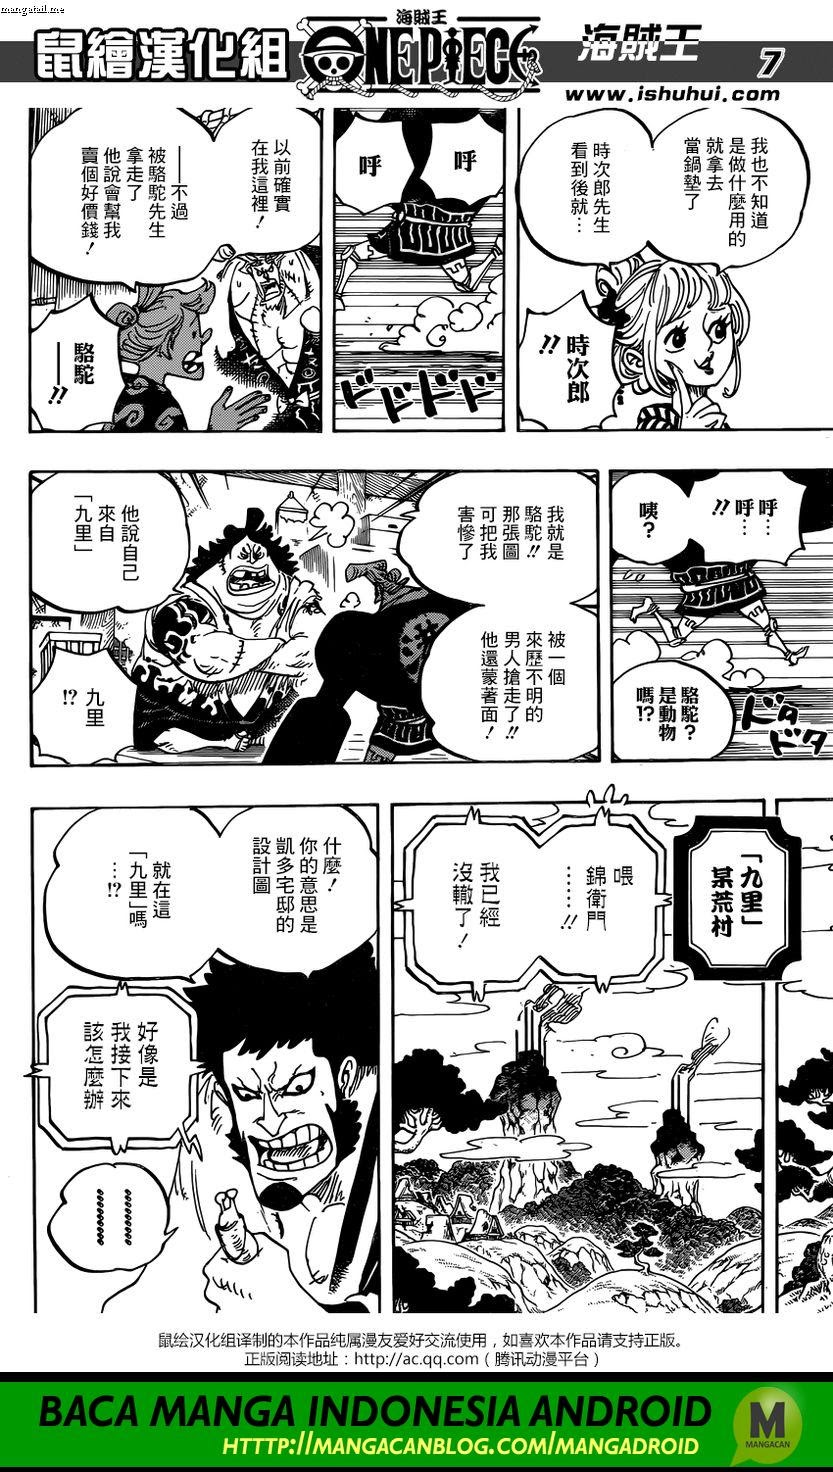 One Piece Chapter 928 – Raw - 103